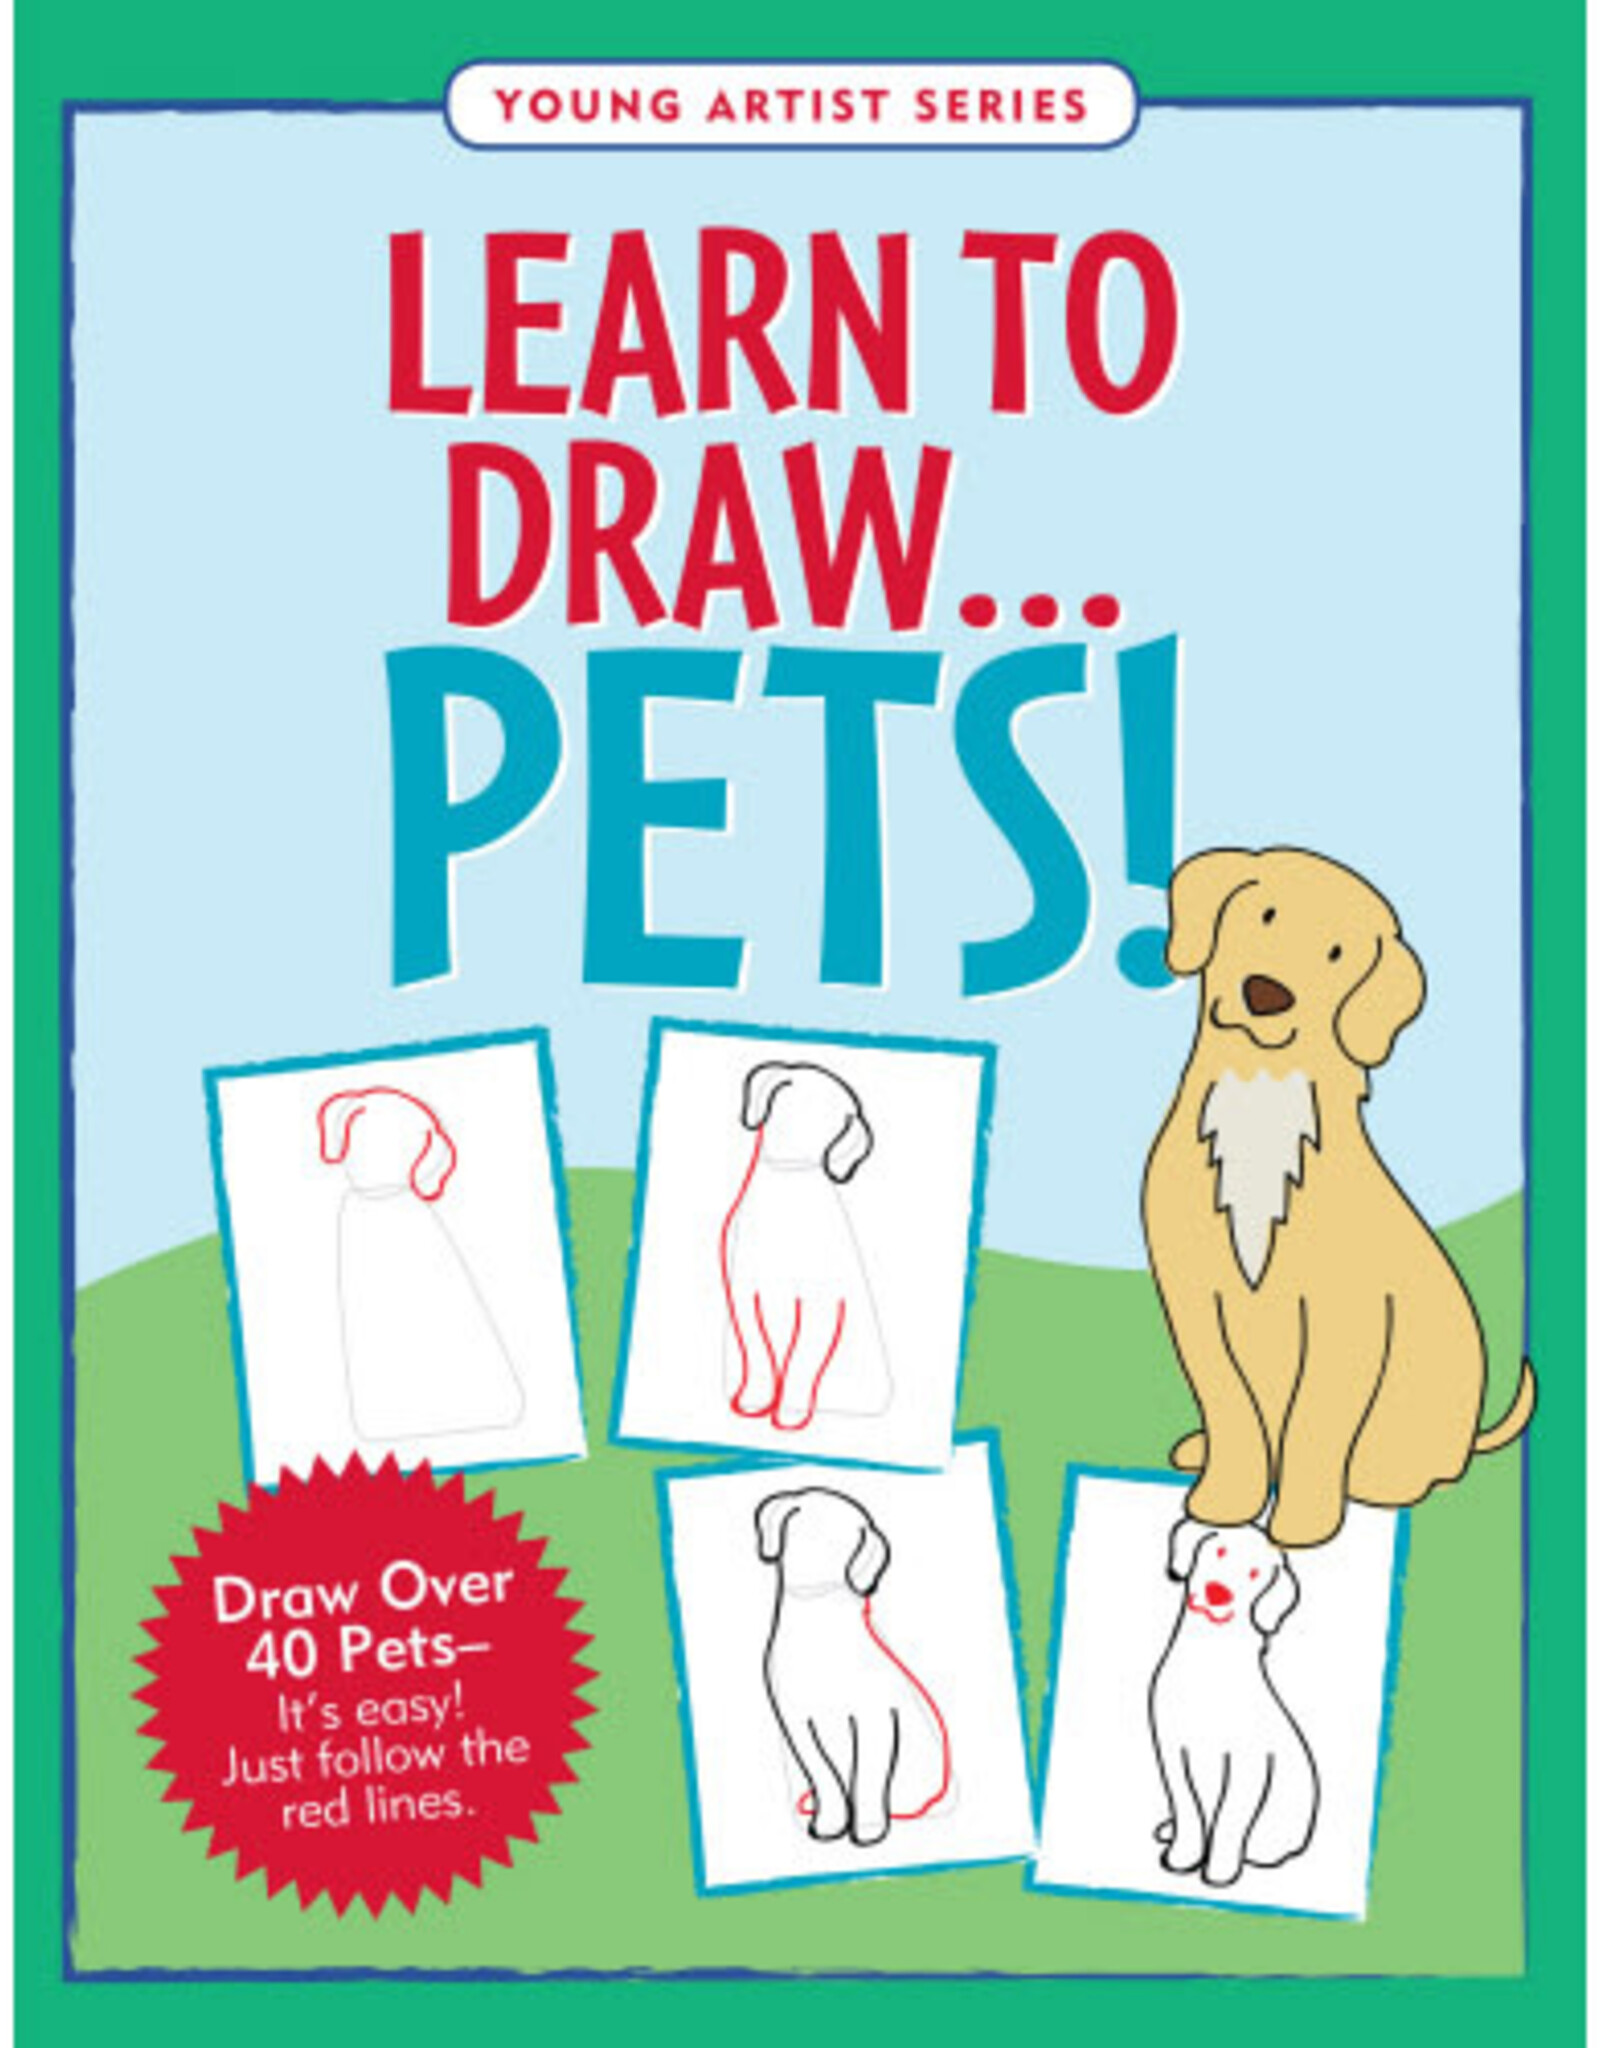 Peter Pauper Press Learn to Draw pets